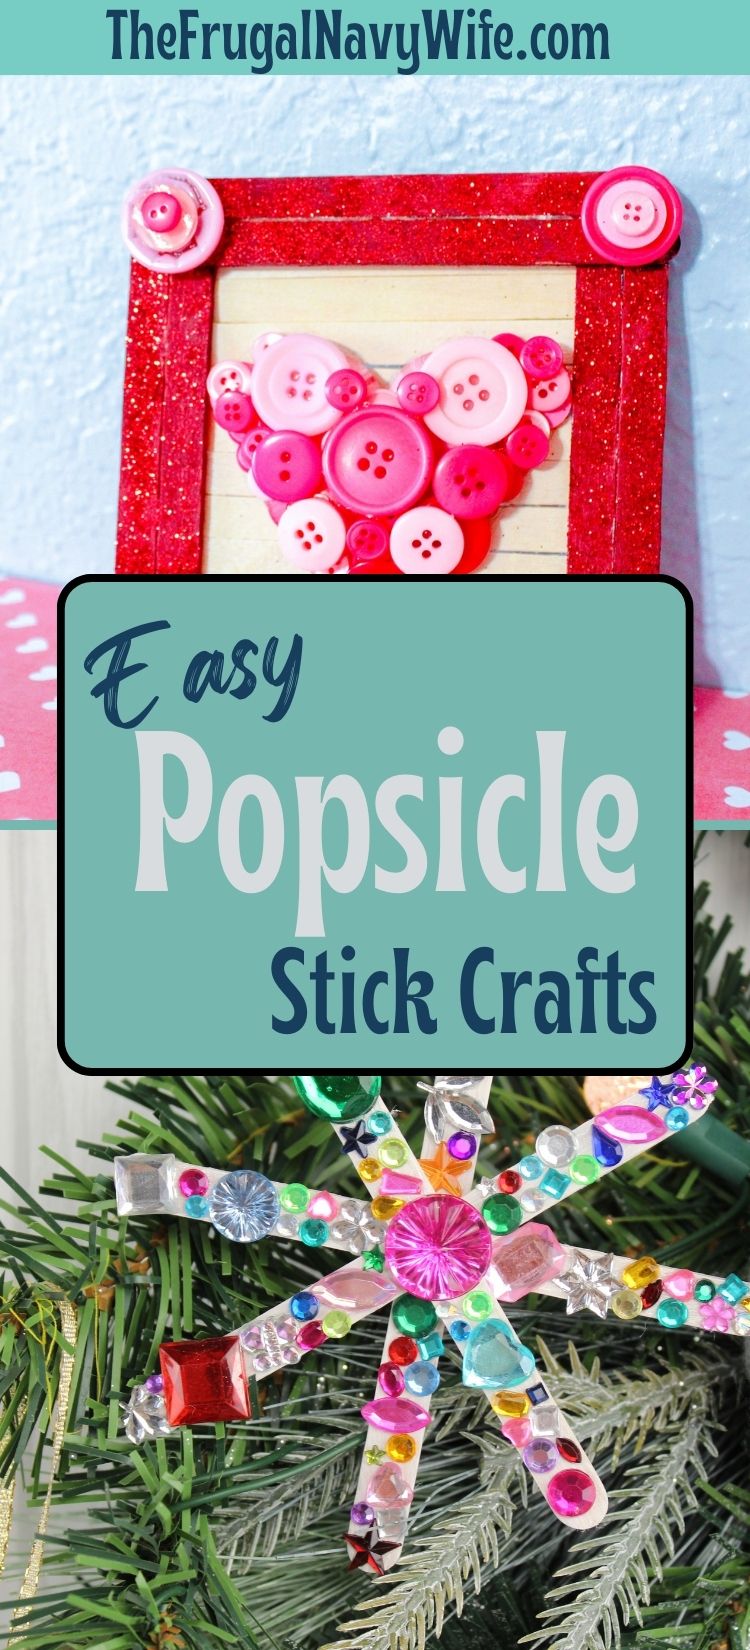 https://www.thefrugalnavywife.com/wp-content/uploads/2022/07/Easy-Popsicle-Stick-Crafts-Pin.jpg